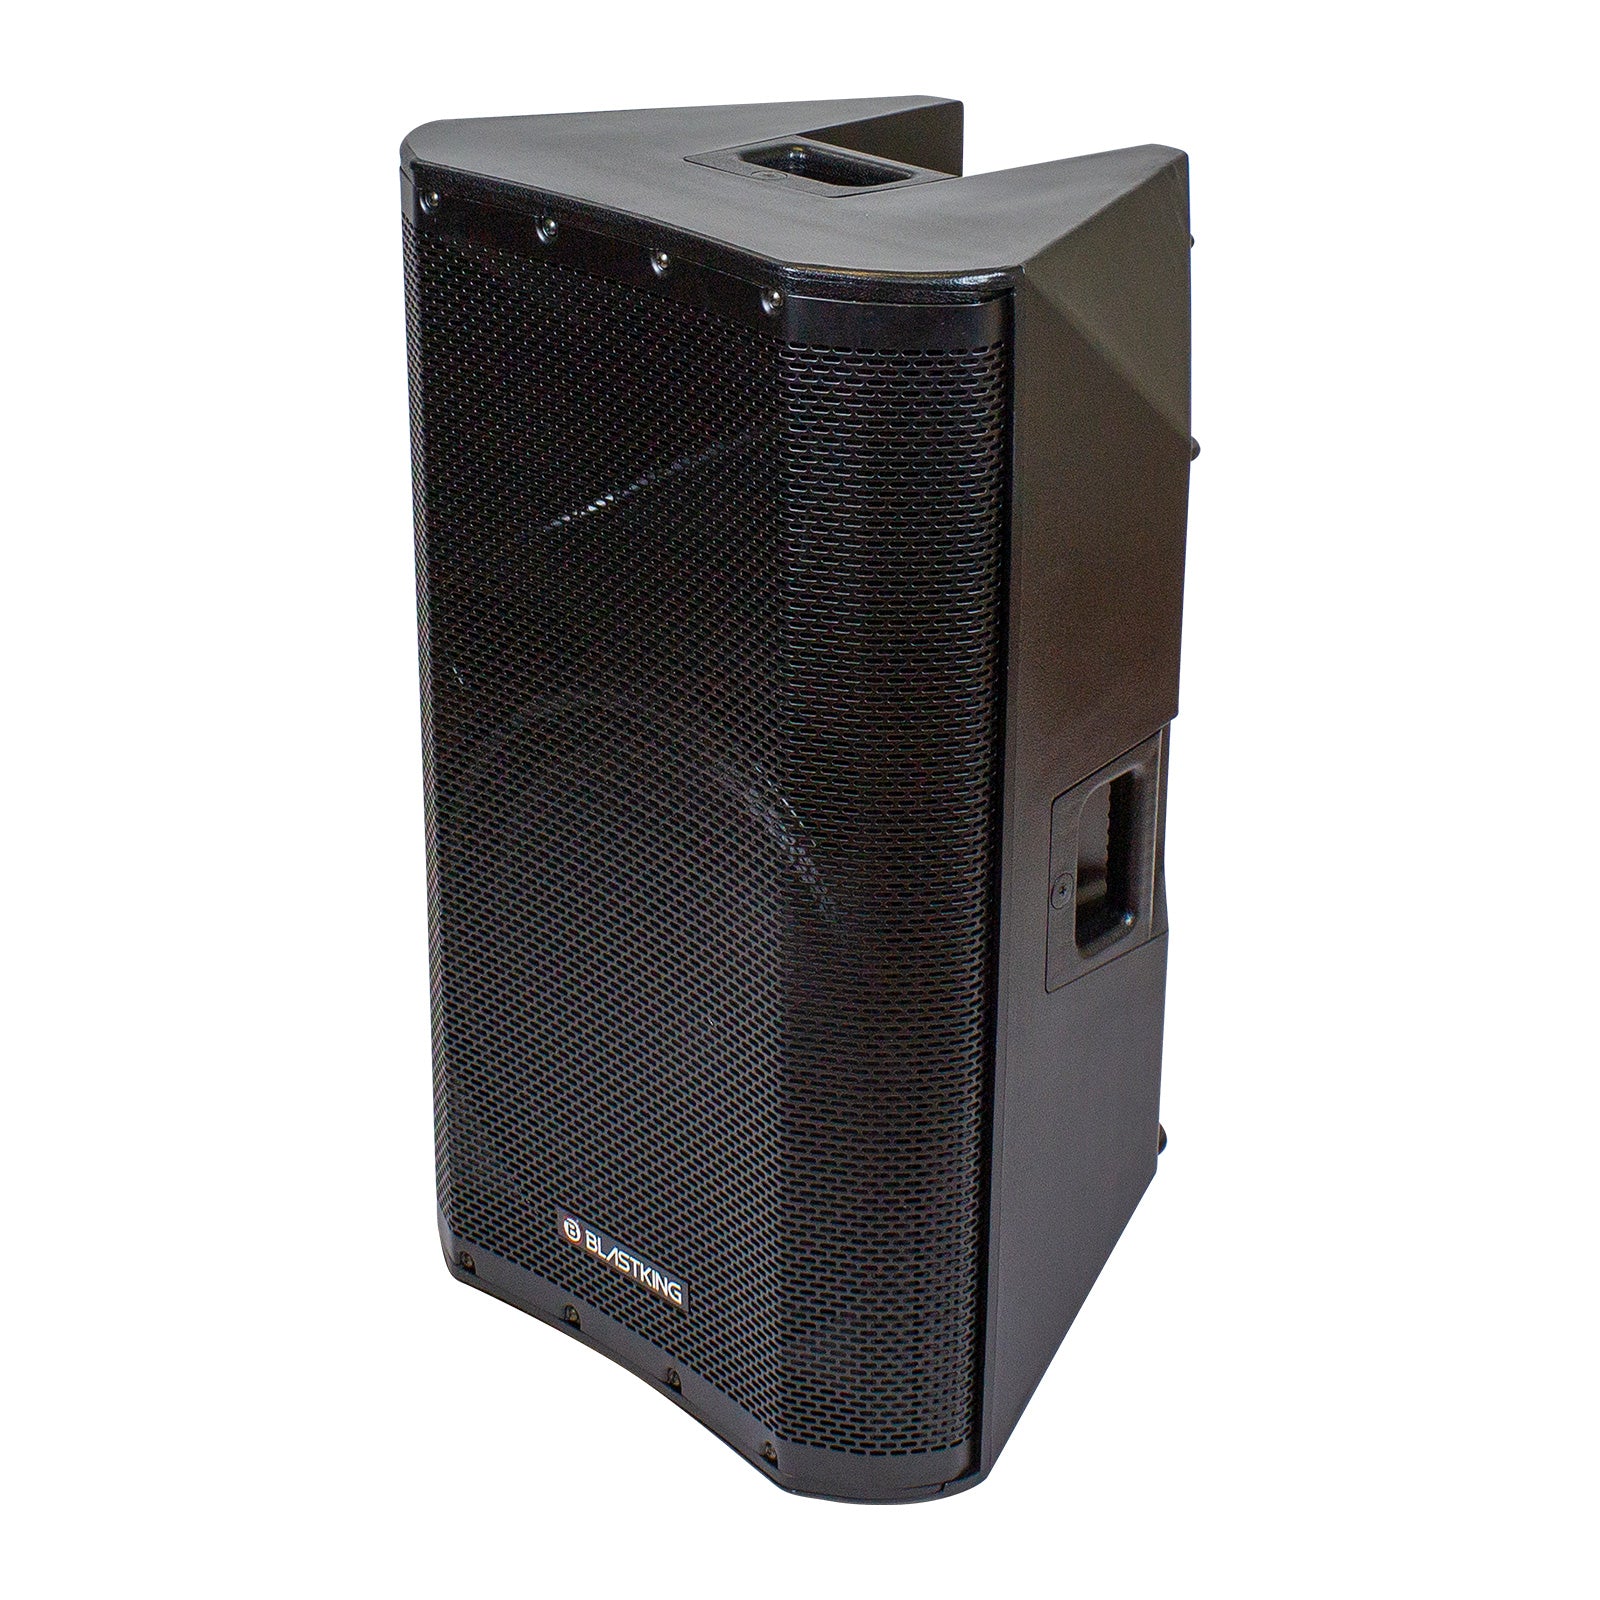 Blastking XS212A 800 Watts 12 inch 2-way Active Loudspeaker w/Bluetooth and MP3 Player